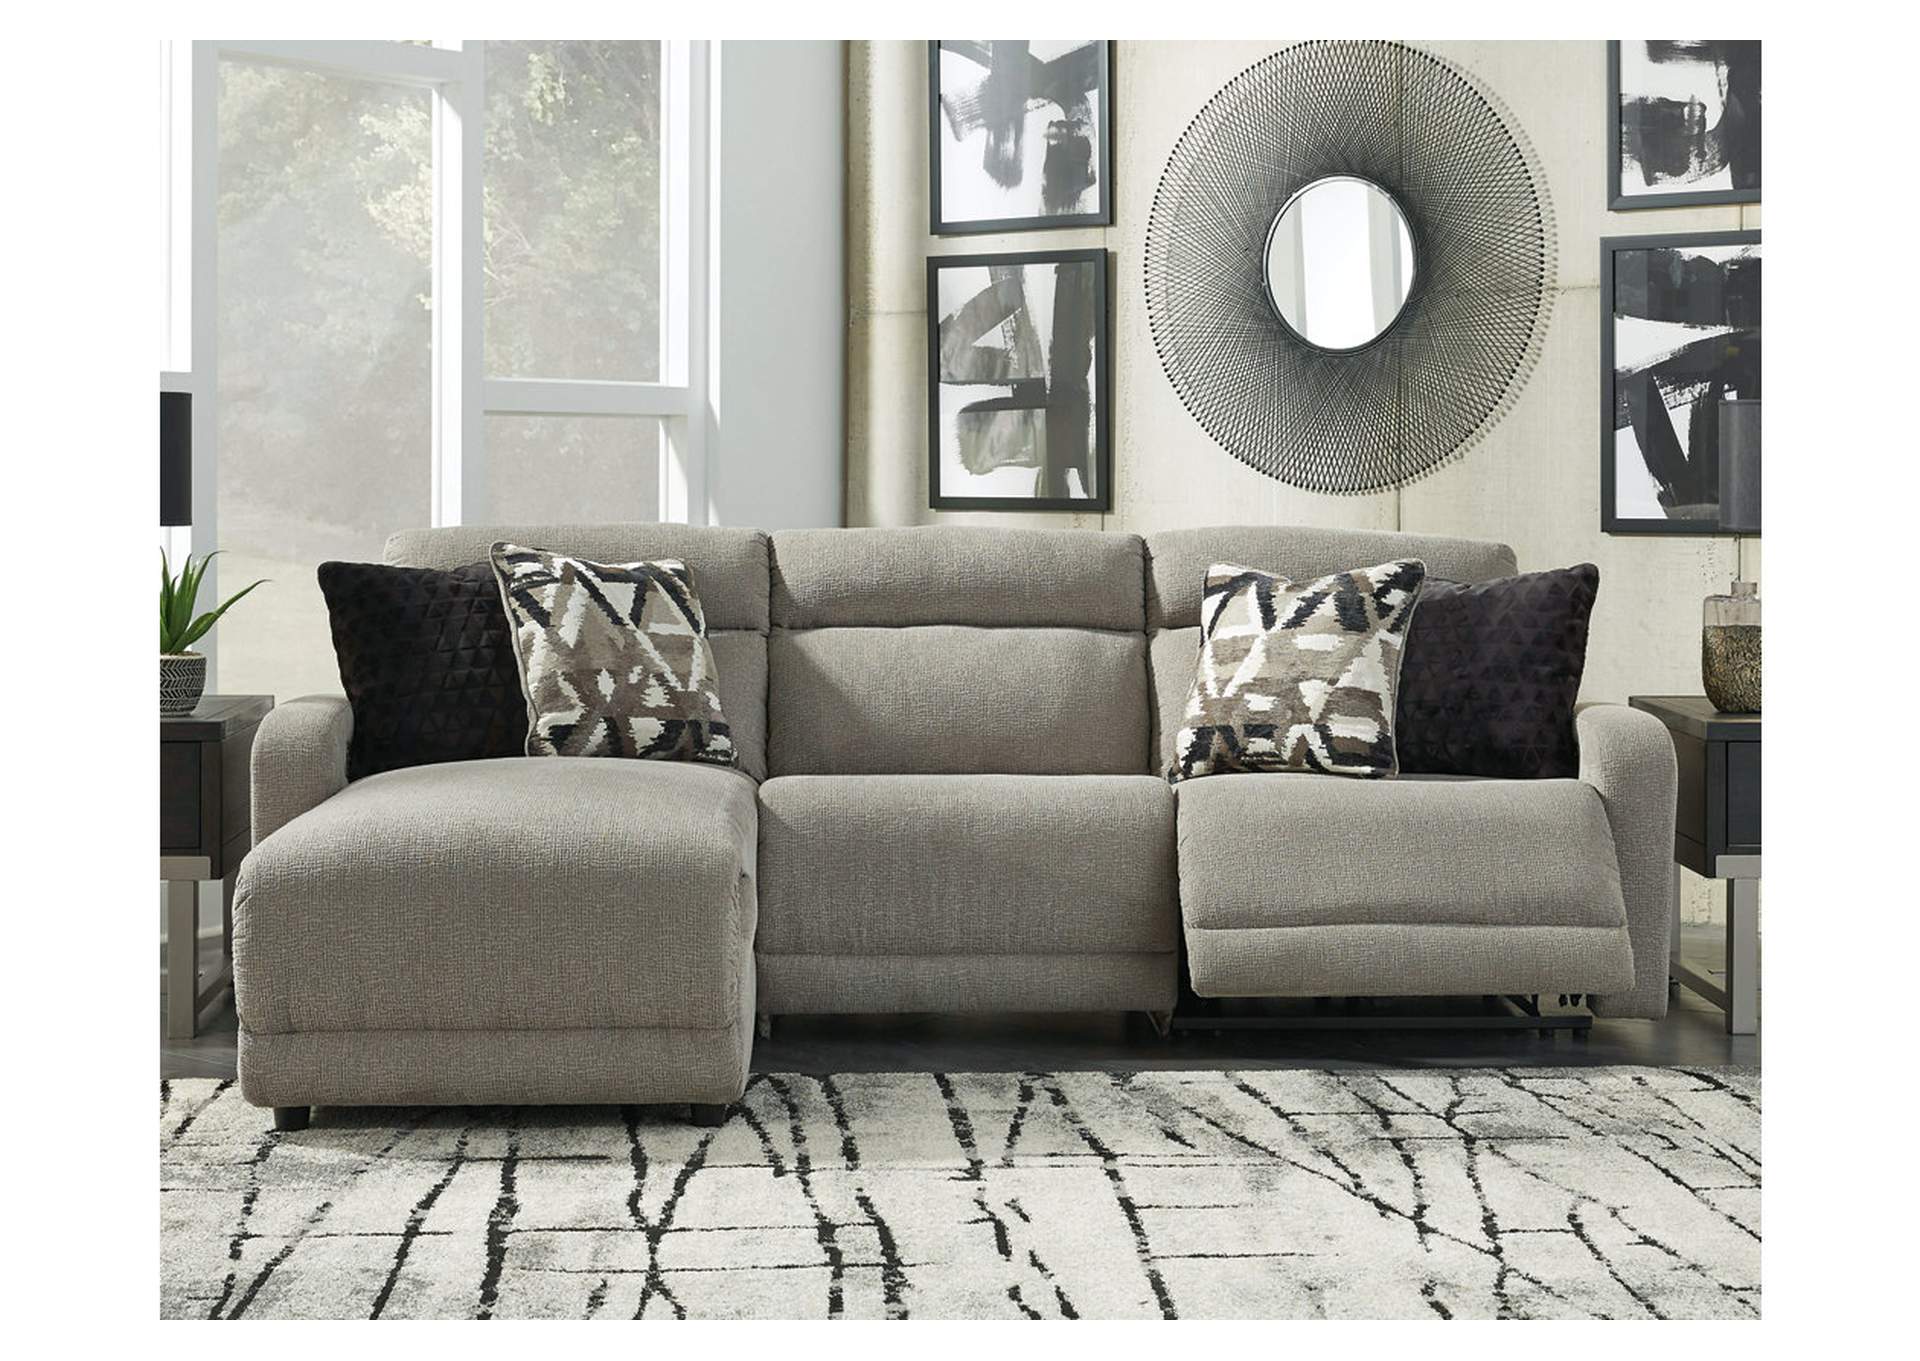 Power Reclining Sectional With Chaise